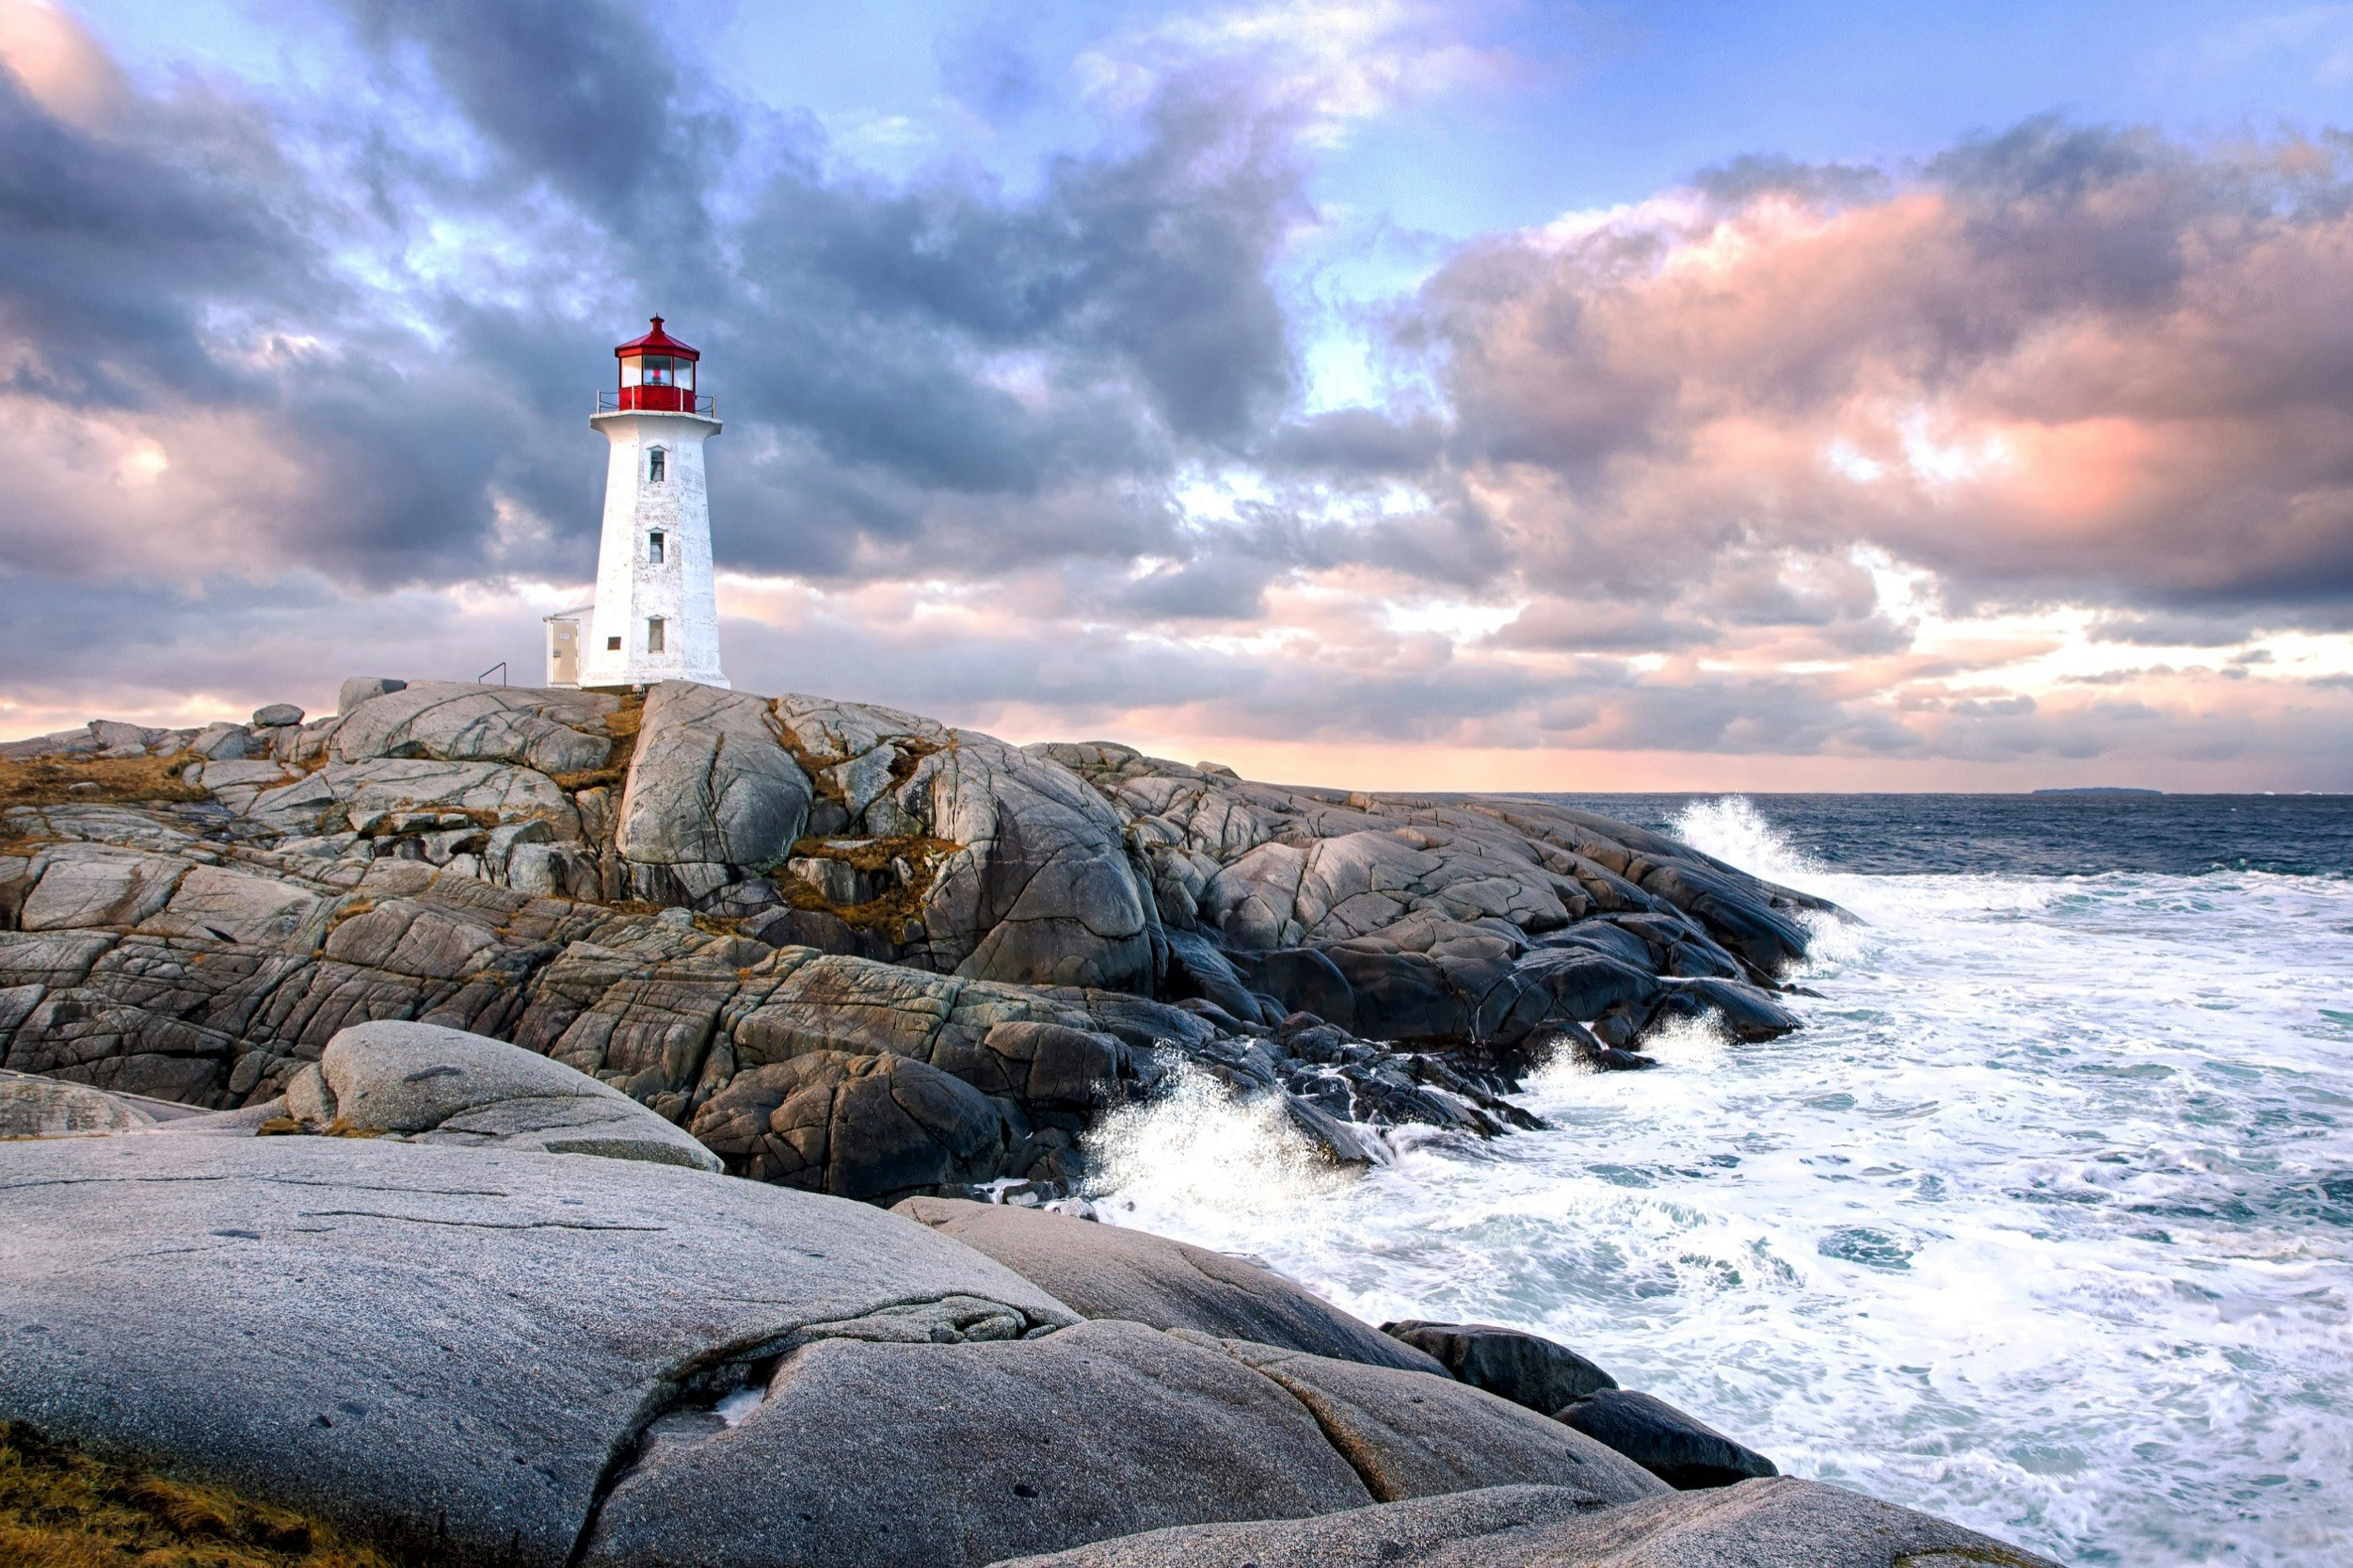 Waves crash on the rocks below a red and white lighthouse near Halifax, Nova Scotia